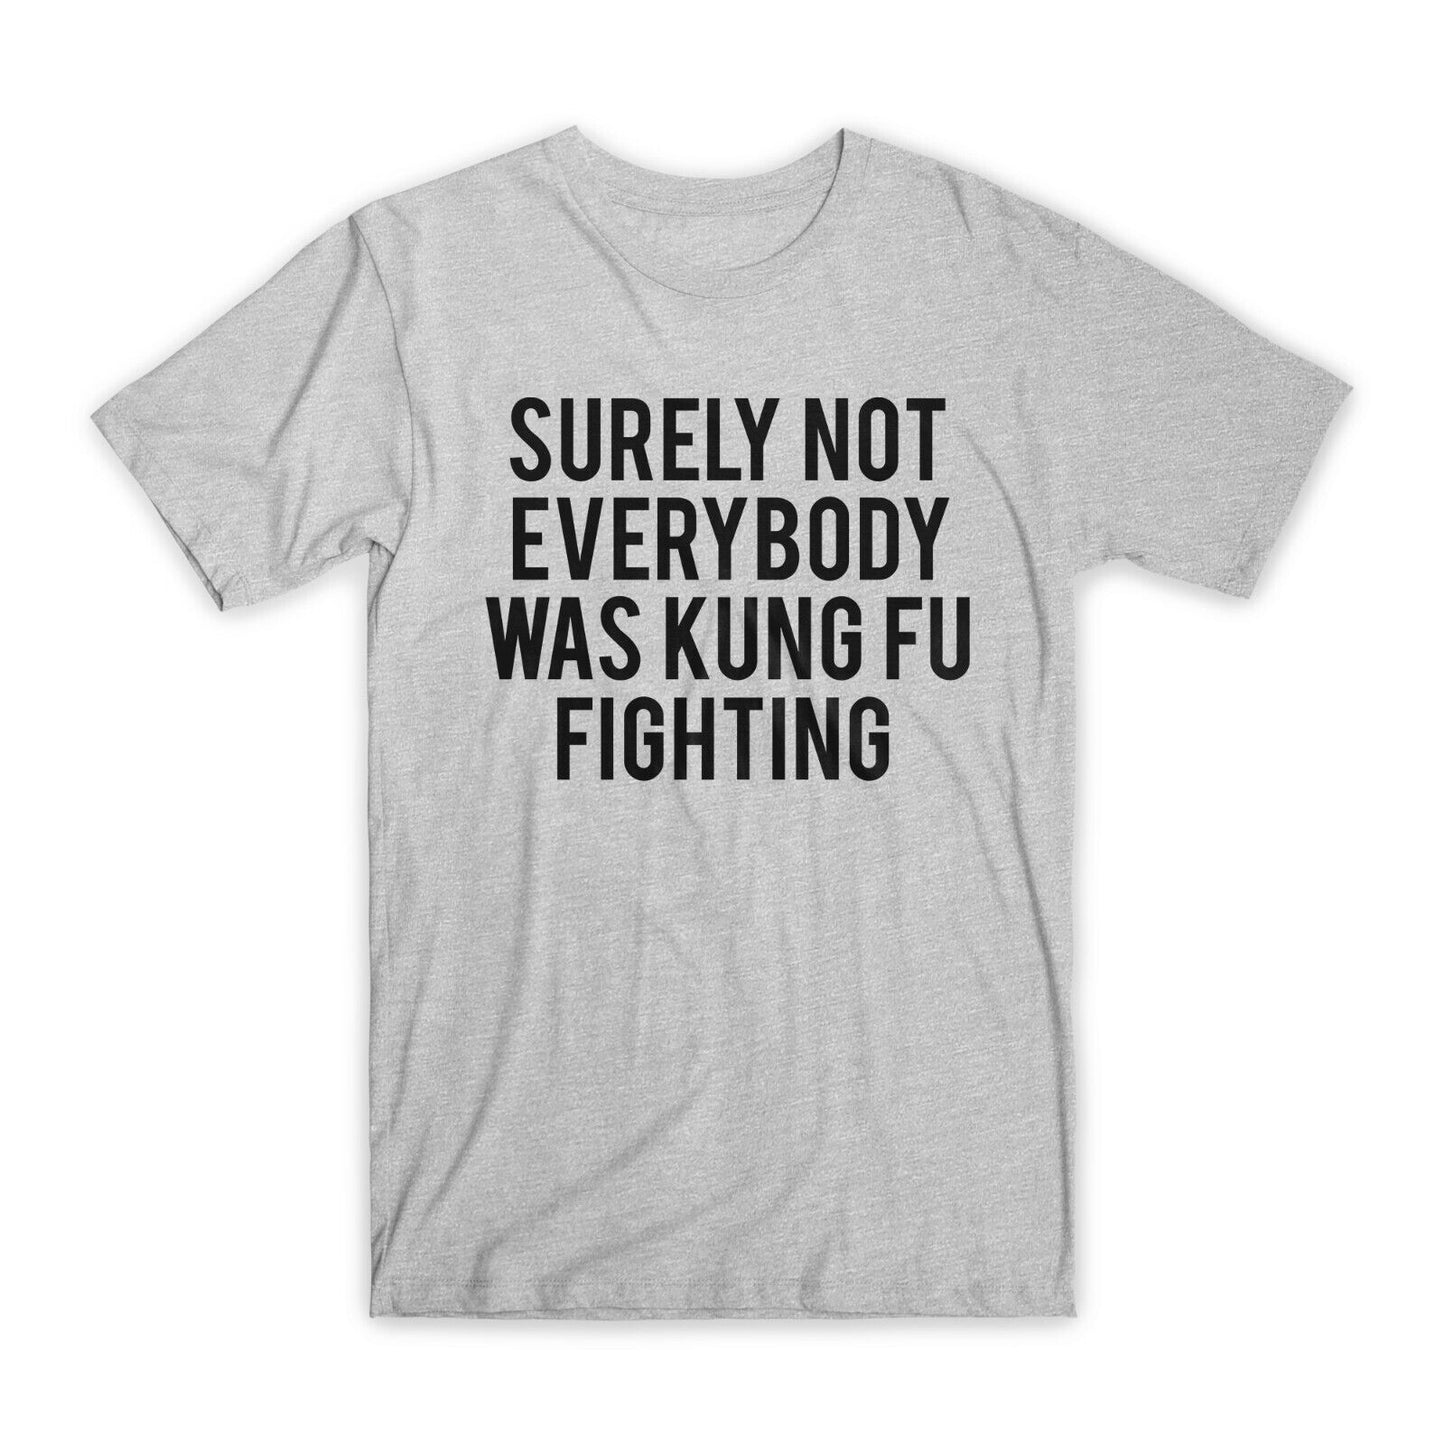 Surely Not Everybody Was Kung Fu Fighting T-Shirt Premium Cotton Funny Tees NEW